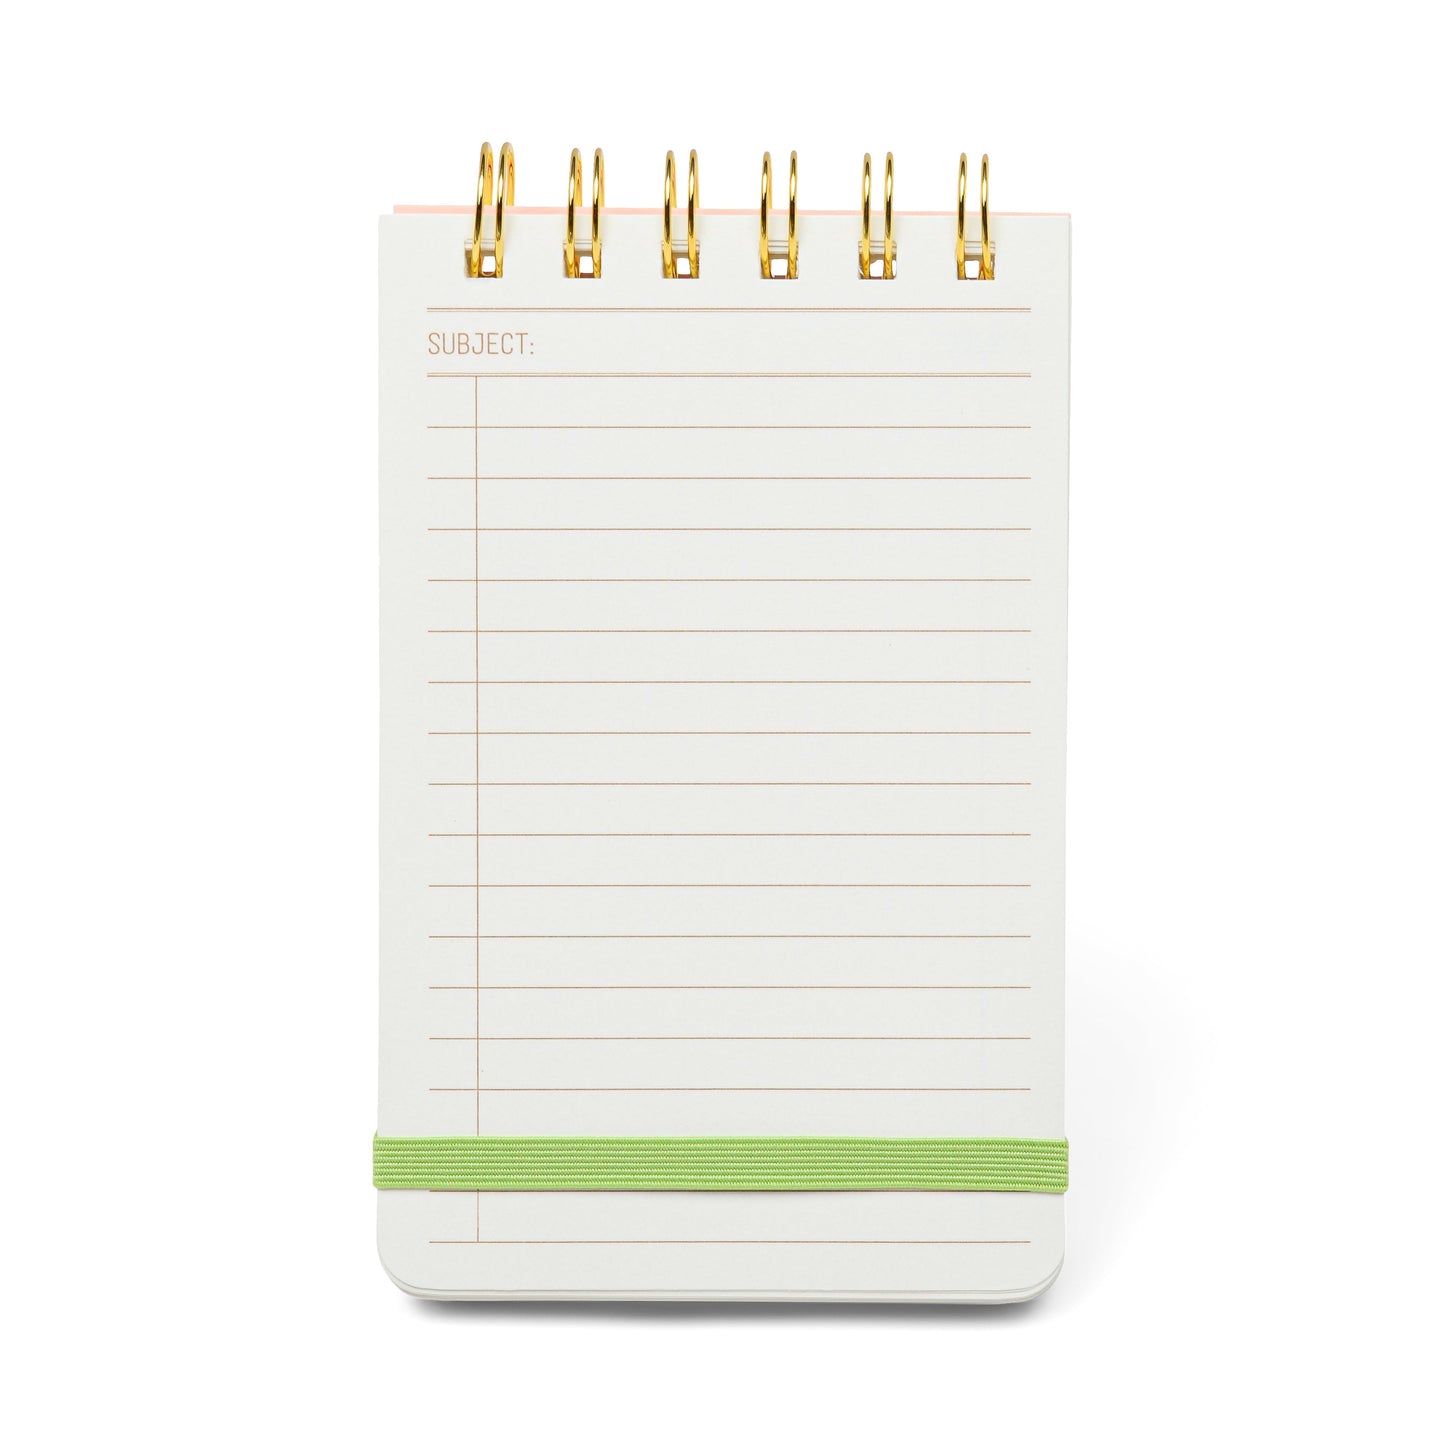 Vintage Sass Twin Wire Notepad - Froget about it